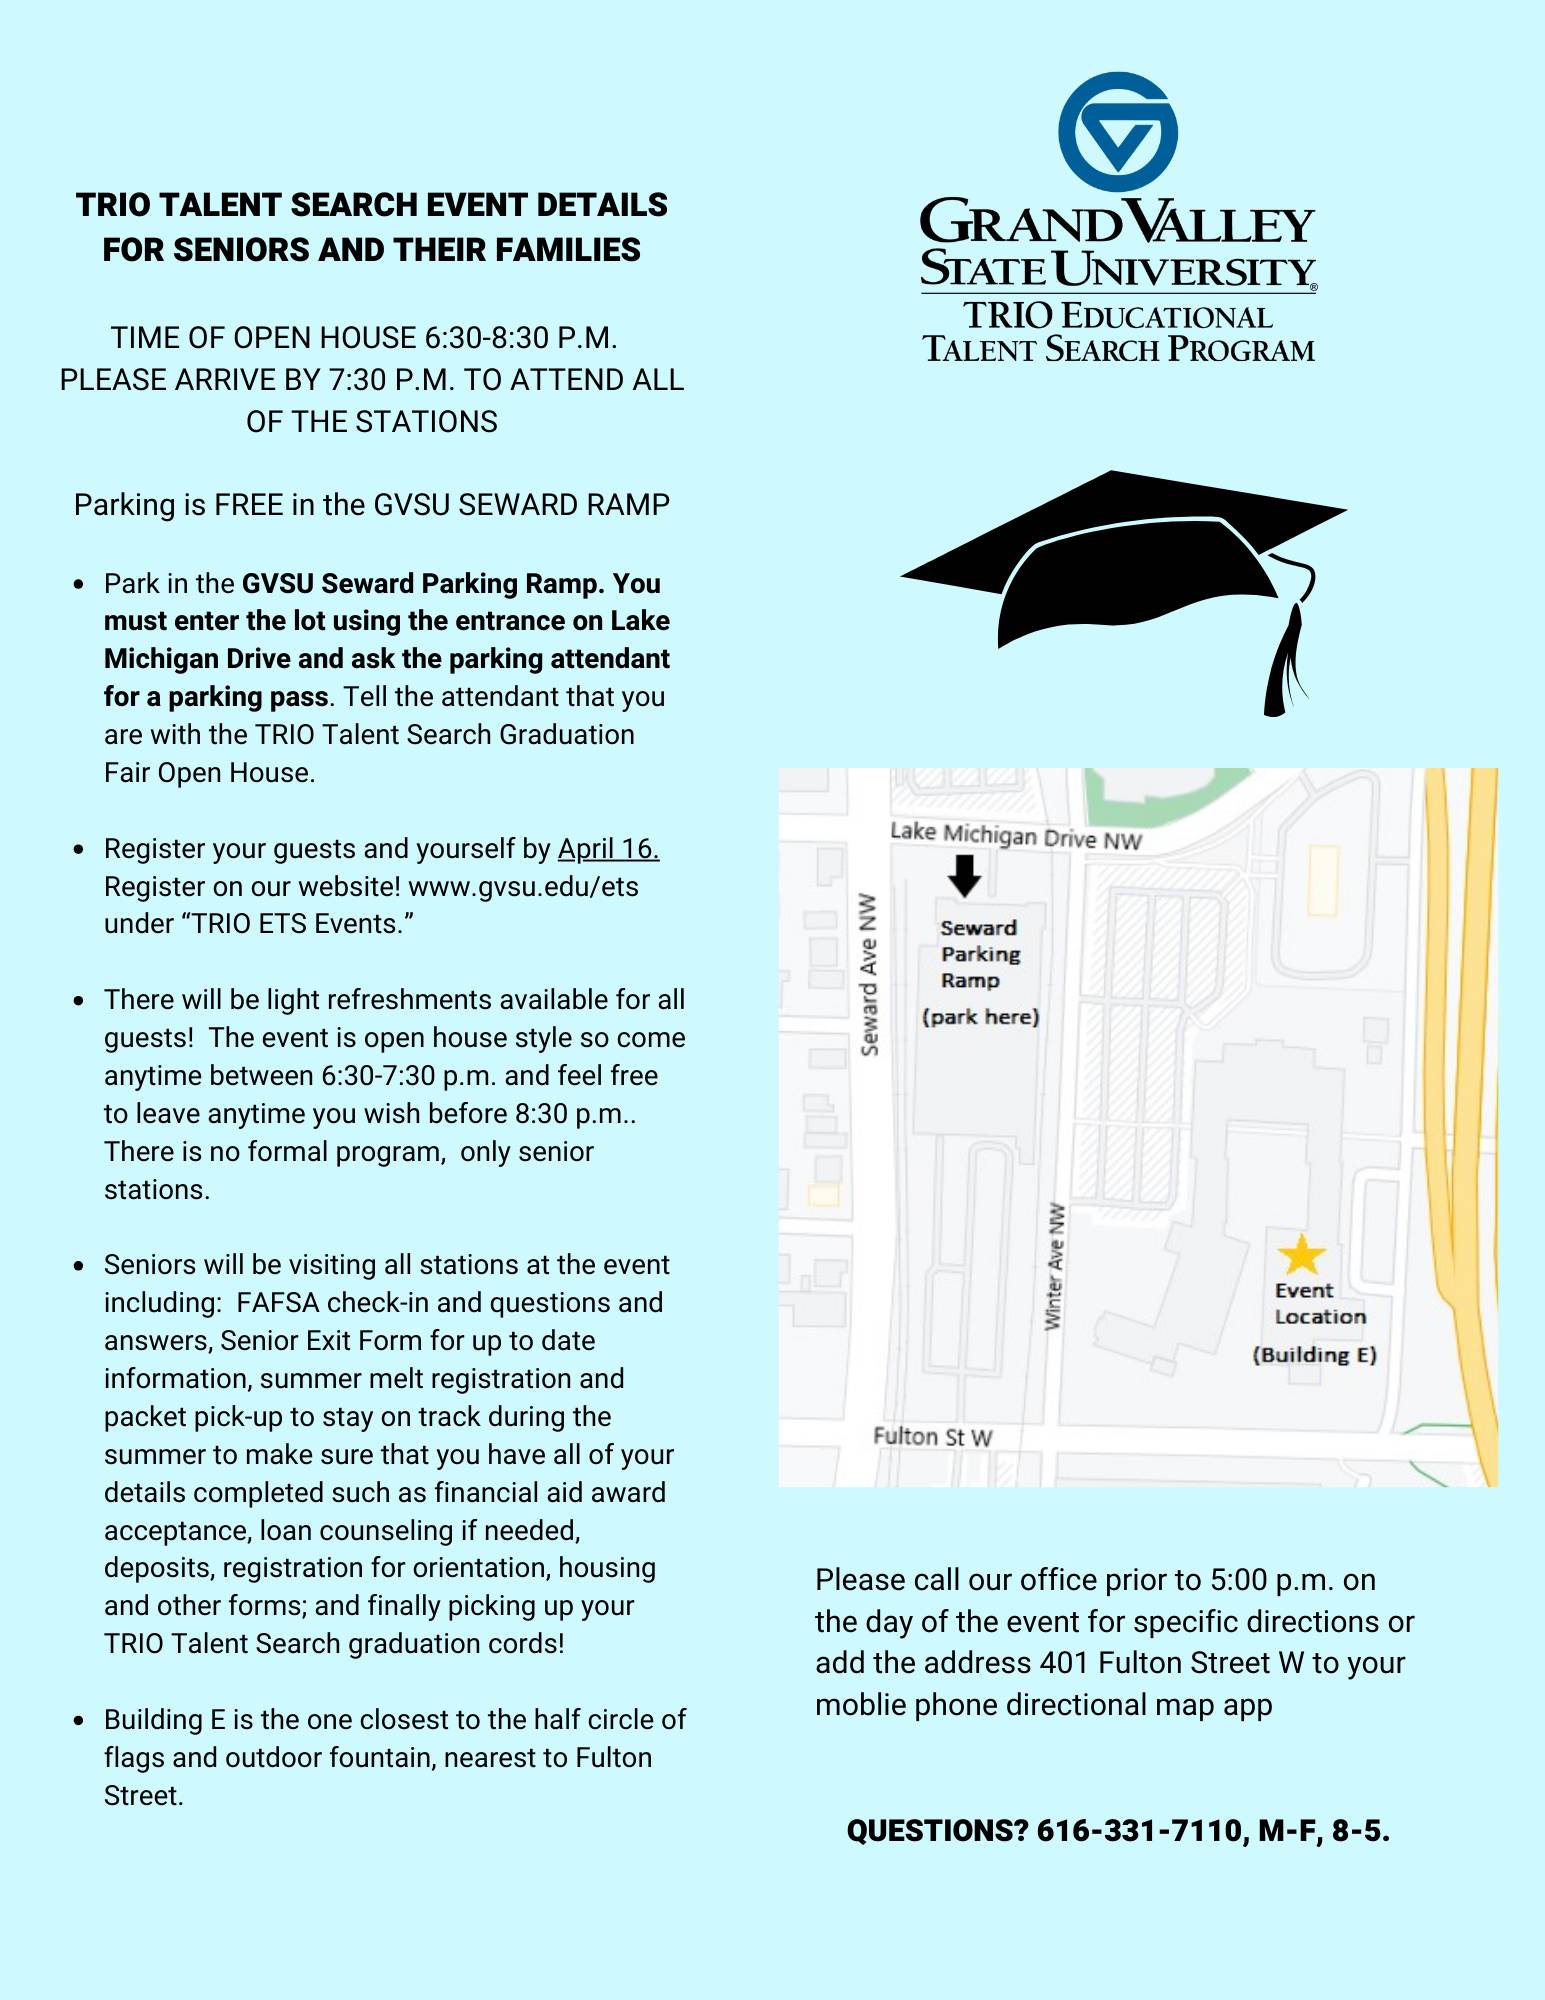 Event details: Park in the GVSU Seward Ramp. Enter off Lake Michigan Drive and request a parking pass. There will be light refreshments and stations to visit, including FAFSA check-in and picking up your graduation cords.